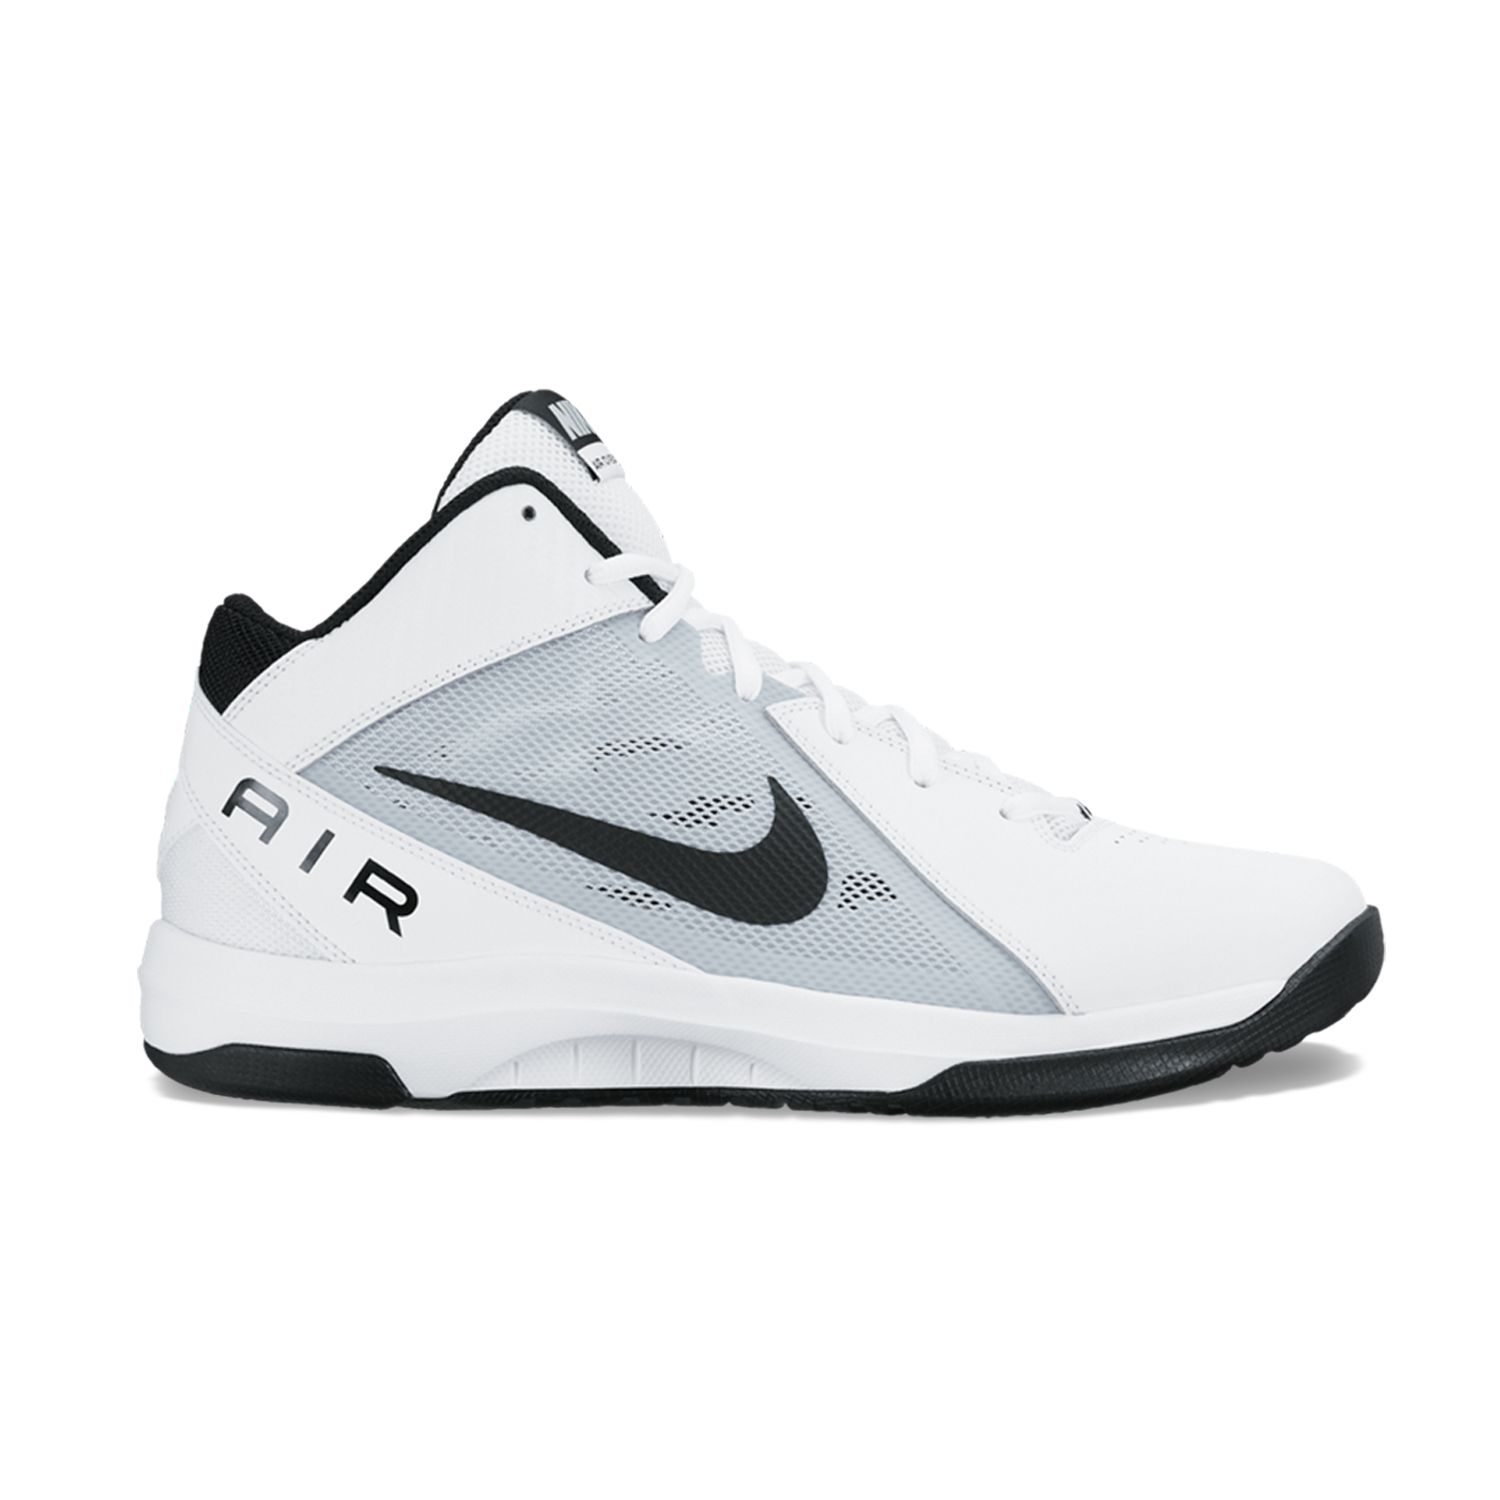 Air Overplay IX Men's Basketball Shoes